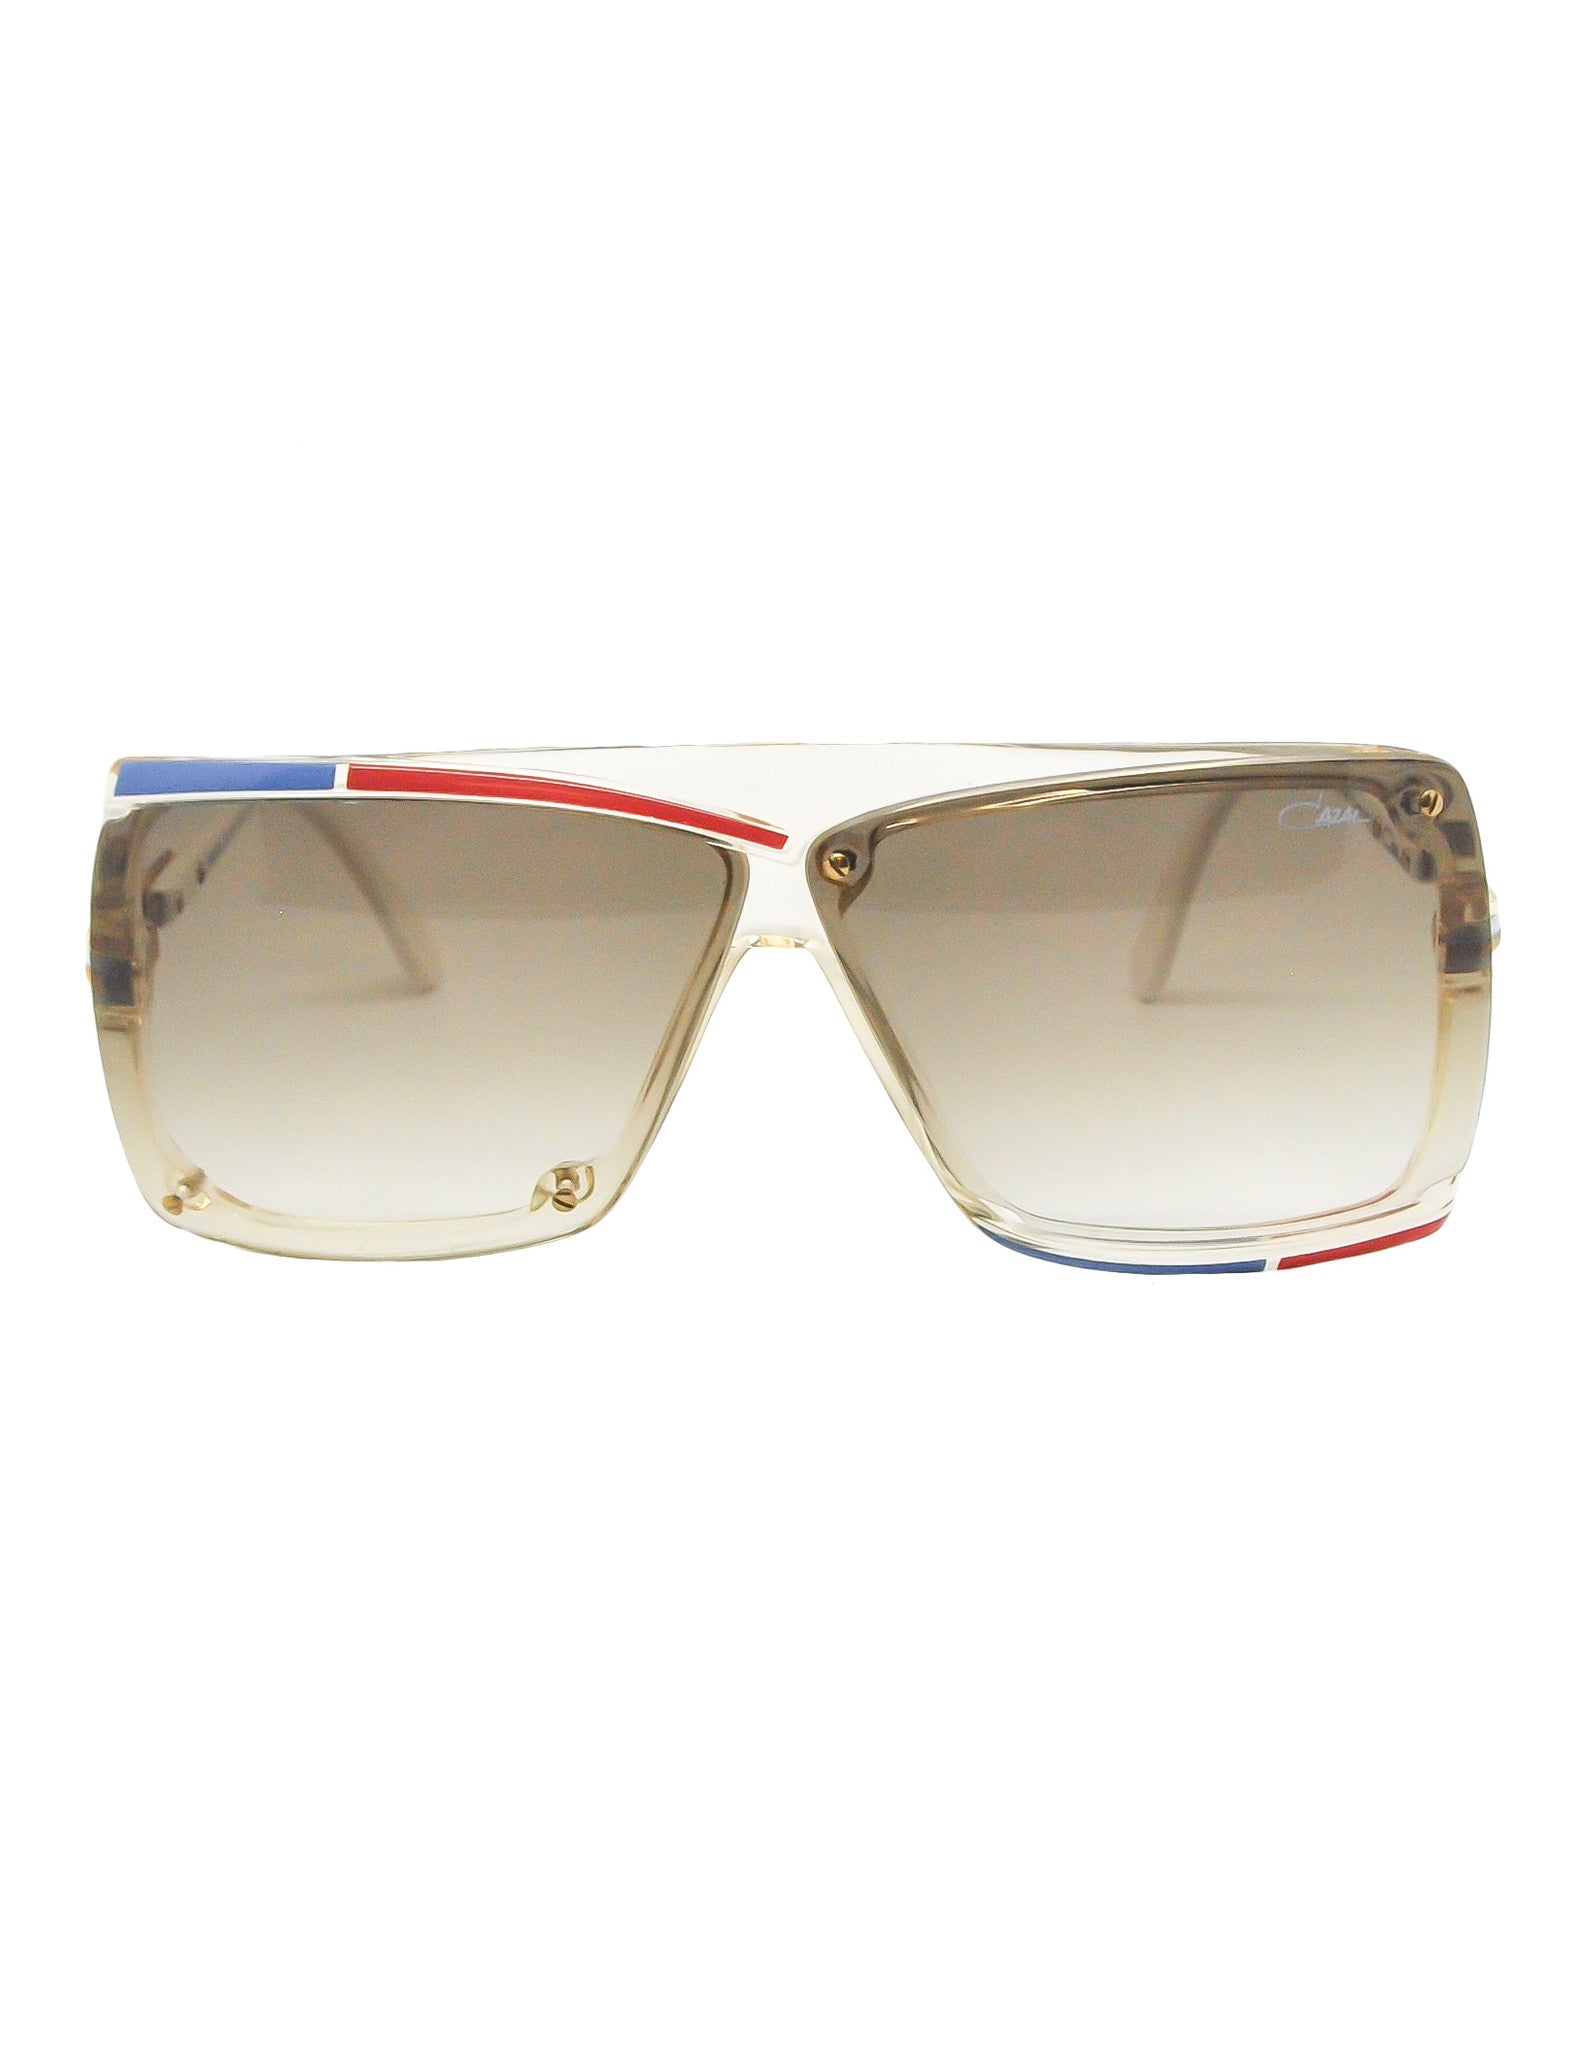 Cazal Vintage Red and Blue Sunglasses 859 278